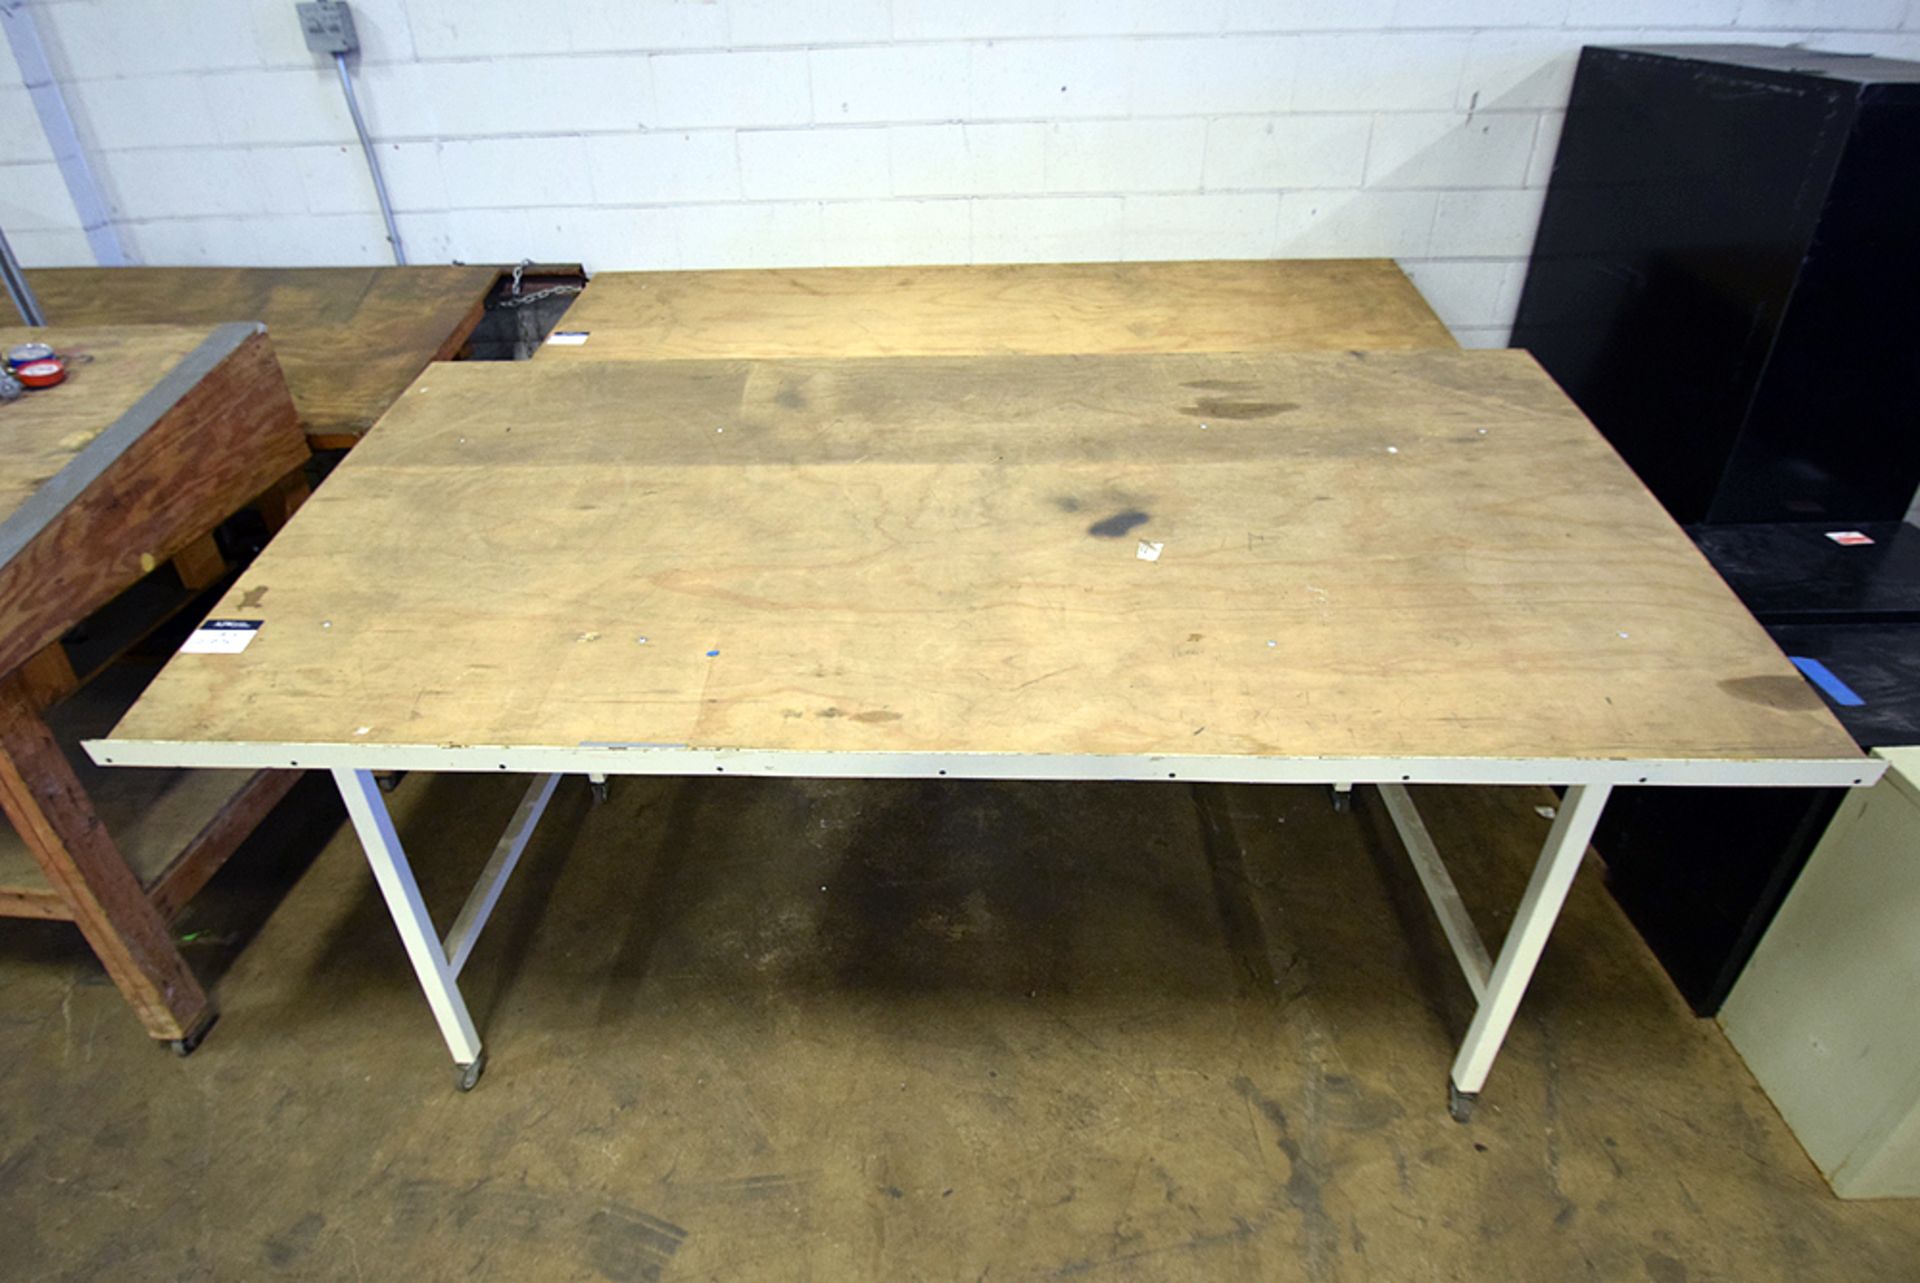 Portable Drafting Table, 96"x48" - Image 2 of 4